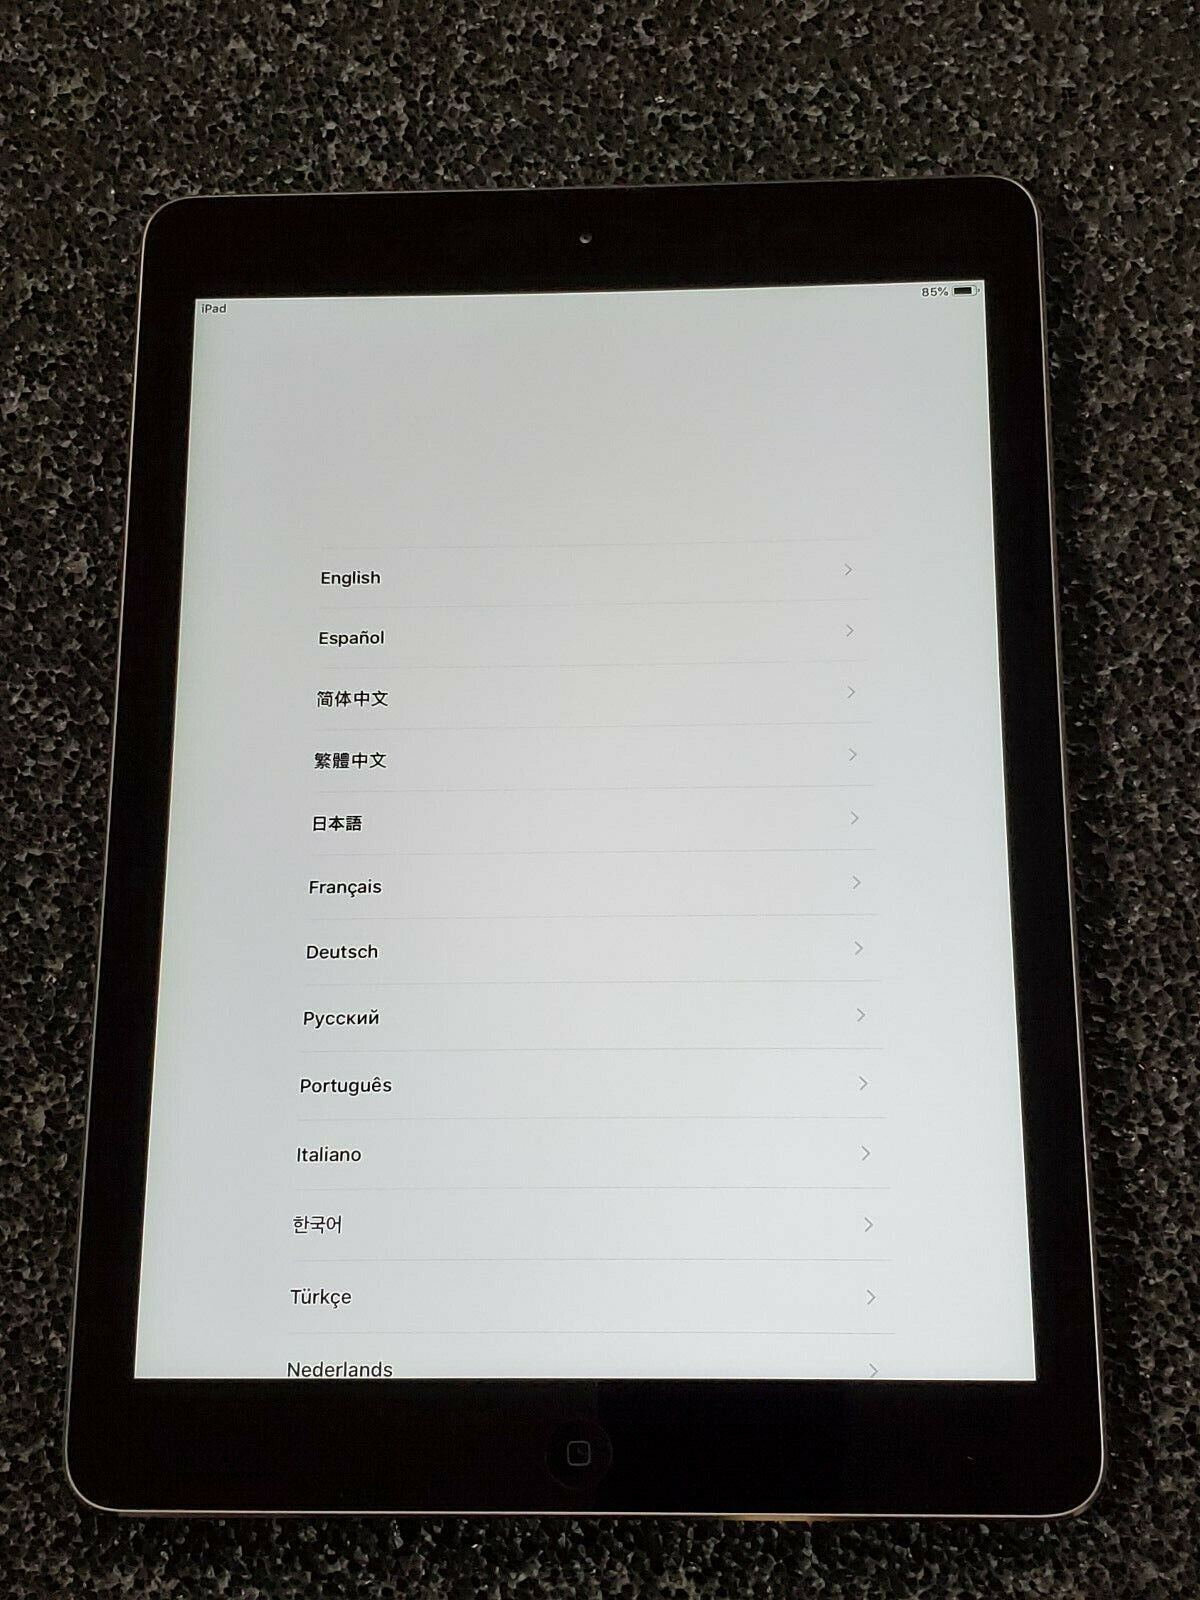 Apple iPad Air 1st Gen. - 16GB 9.7 in - Space Gray(MD785LL/A) grade c lot of 10 Apple